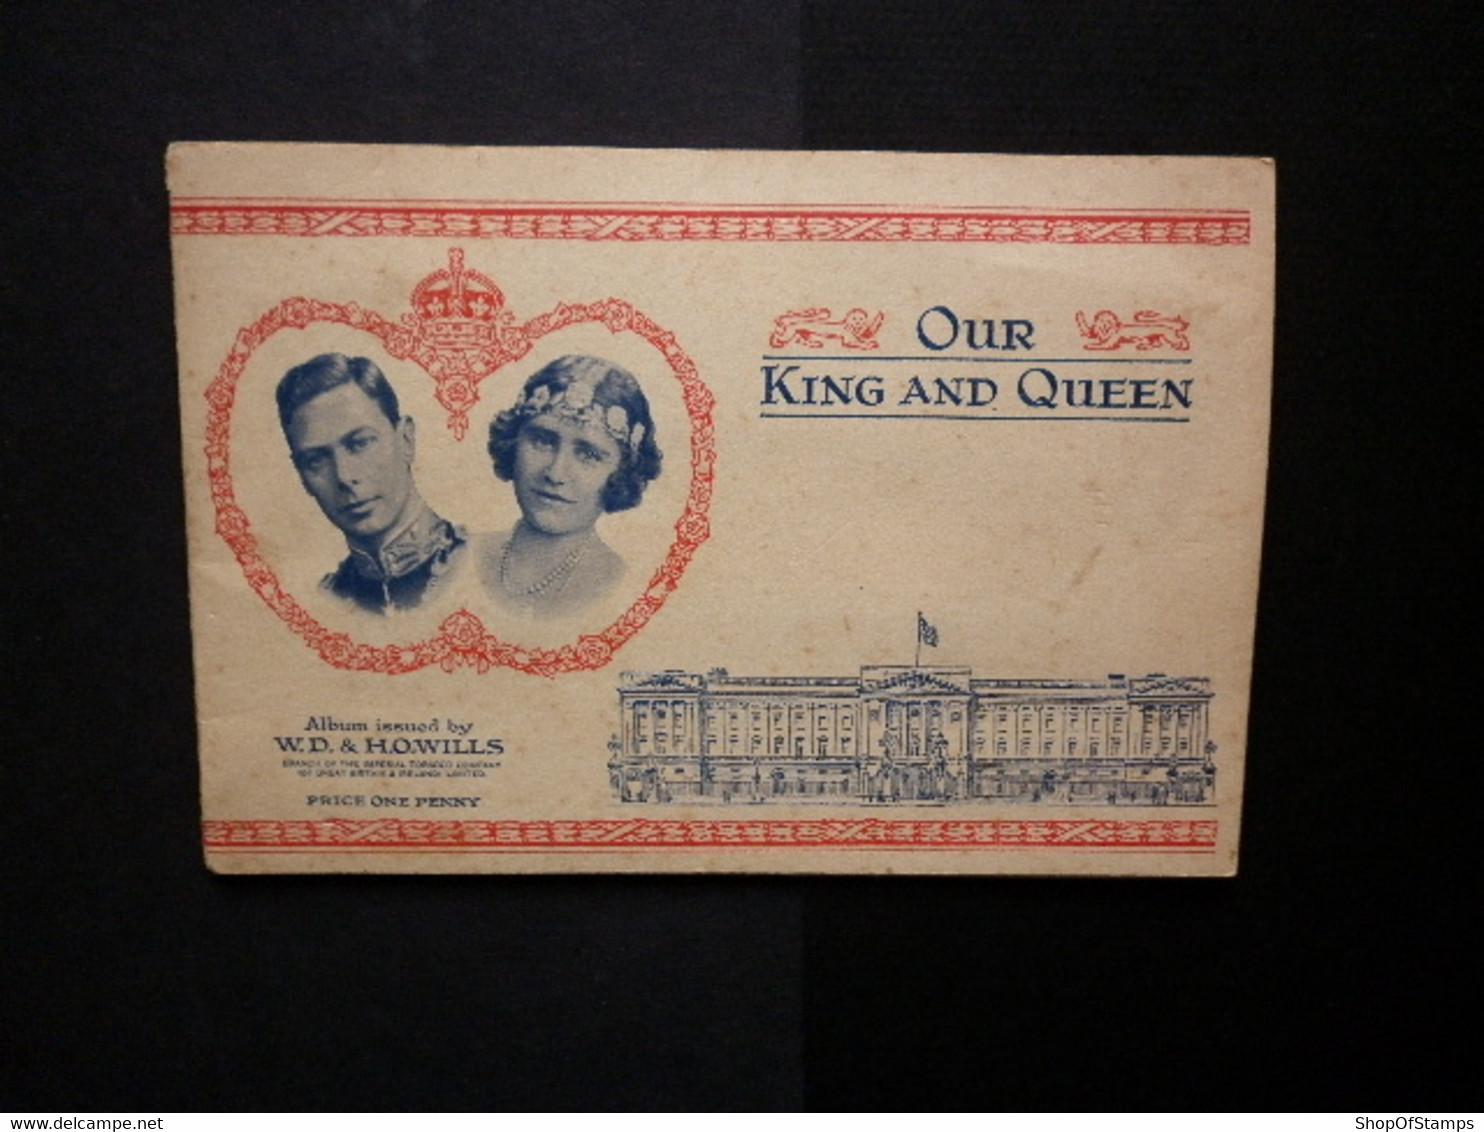 CIGARETTES CARDS OUR KING & QUEEN 50/50 - Player's